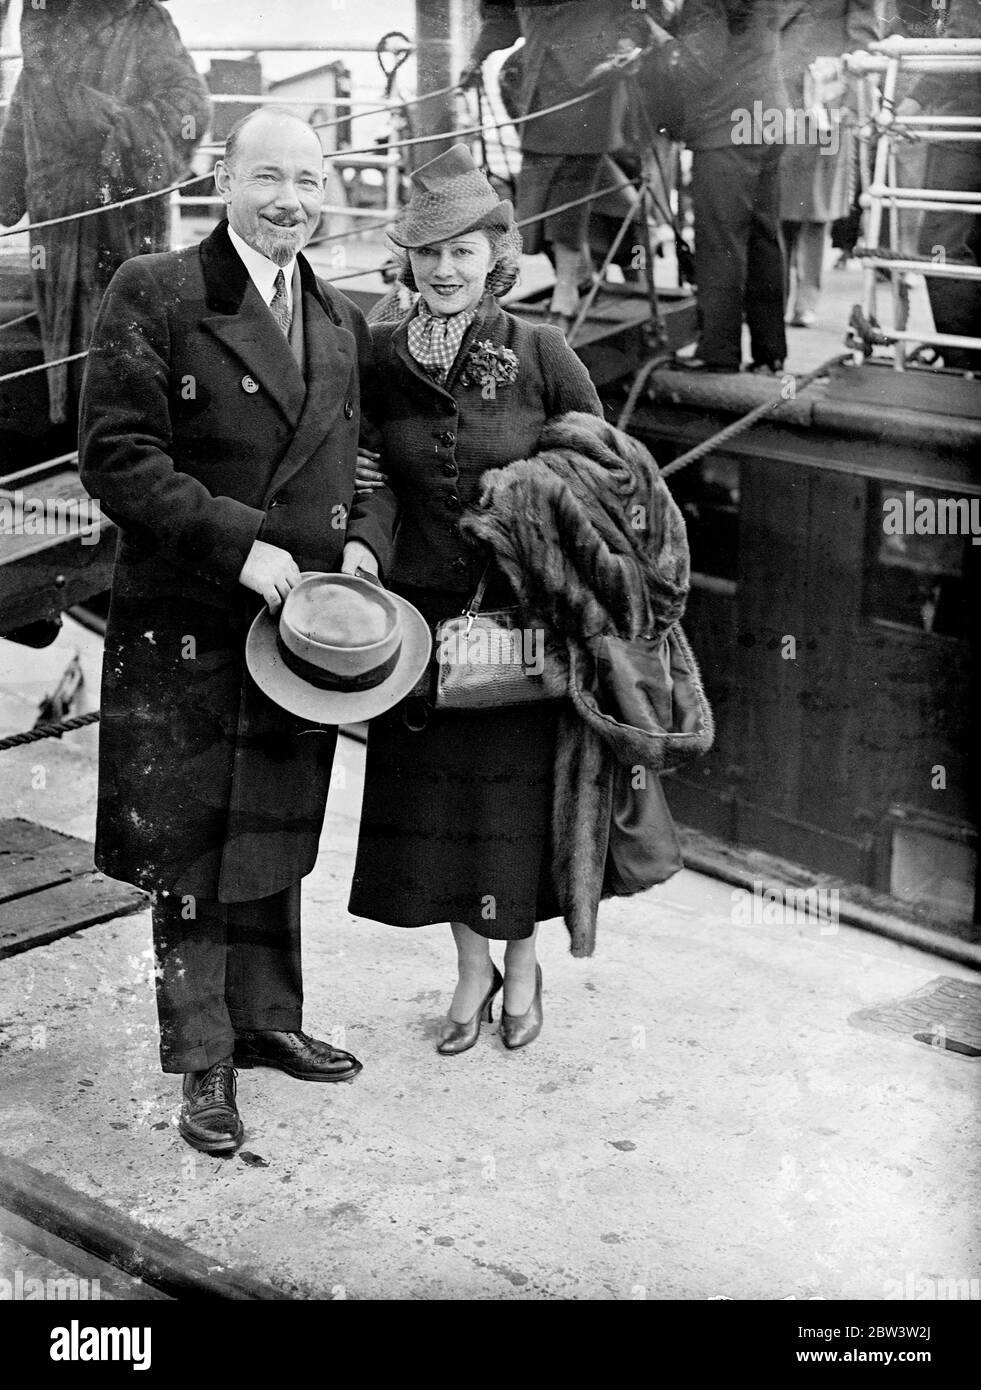 Arctic explorer and wife arrive from America . Sir Hubert Wilkins , the famous Arctic explorer who made an attempt to reach the Pole by submarine a few years ago , arrived at Southampton with his wife aboard the Bremen from New York . Photo shows , Sir Hubert Wilkins and his wife photographed on arrival at Southampton . 29 April 1936 Stock Photo